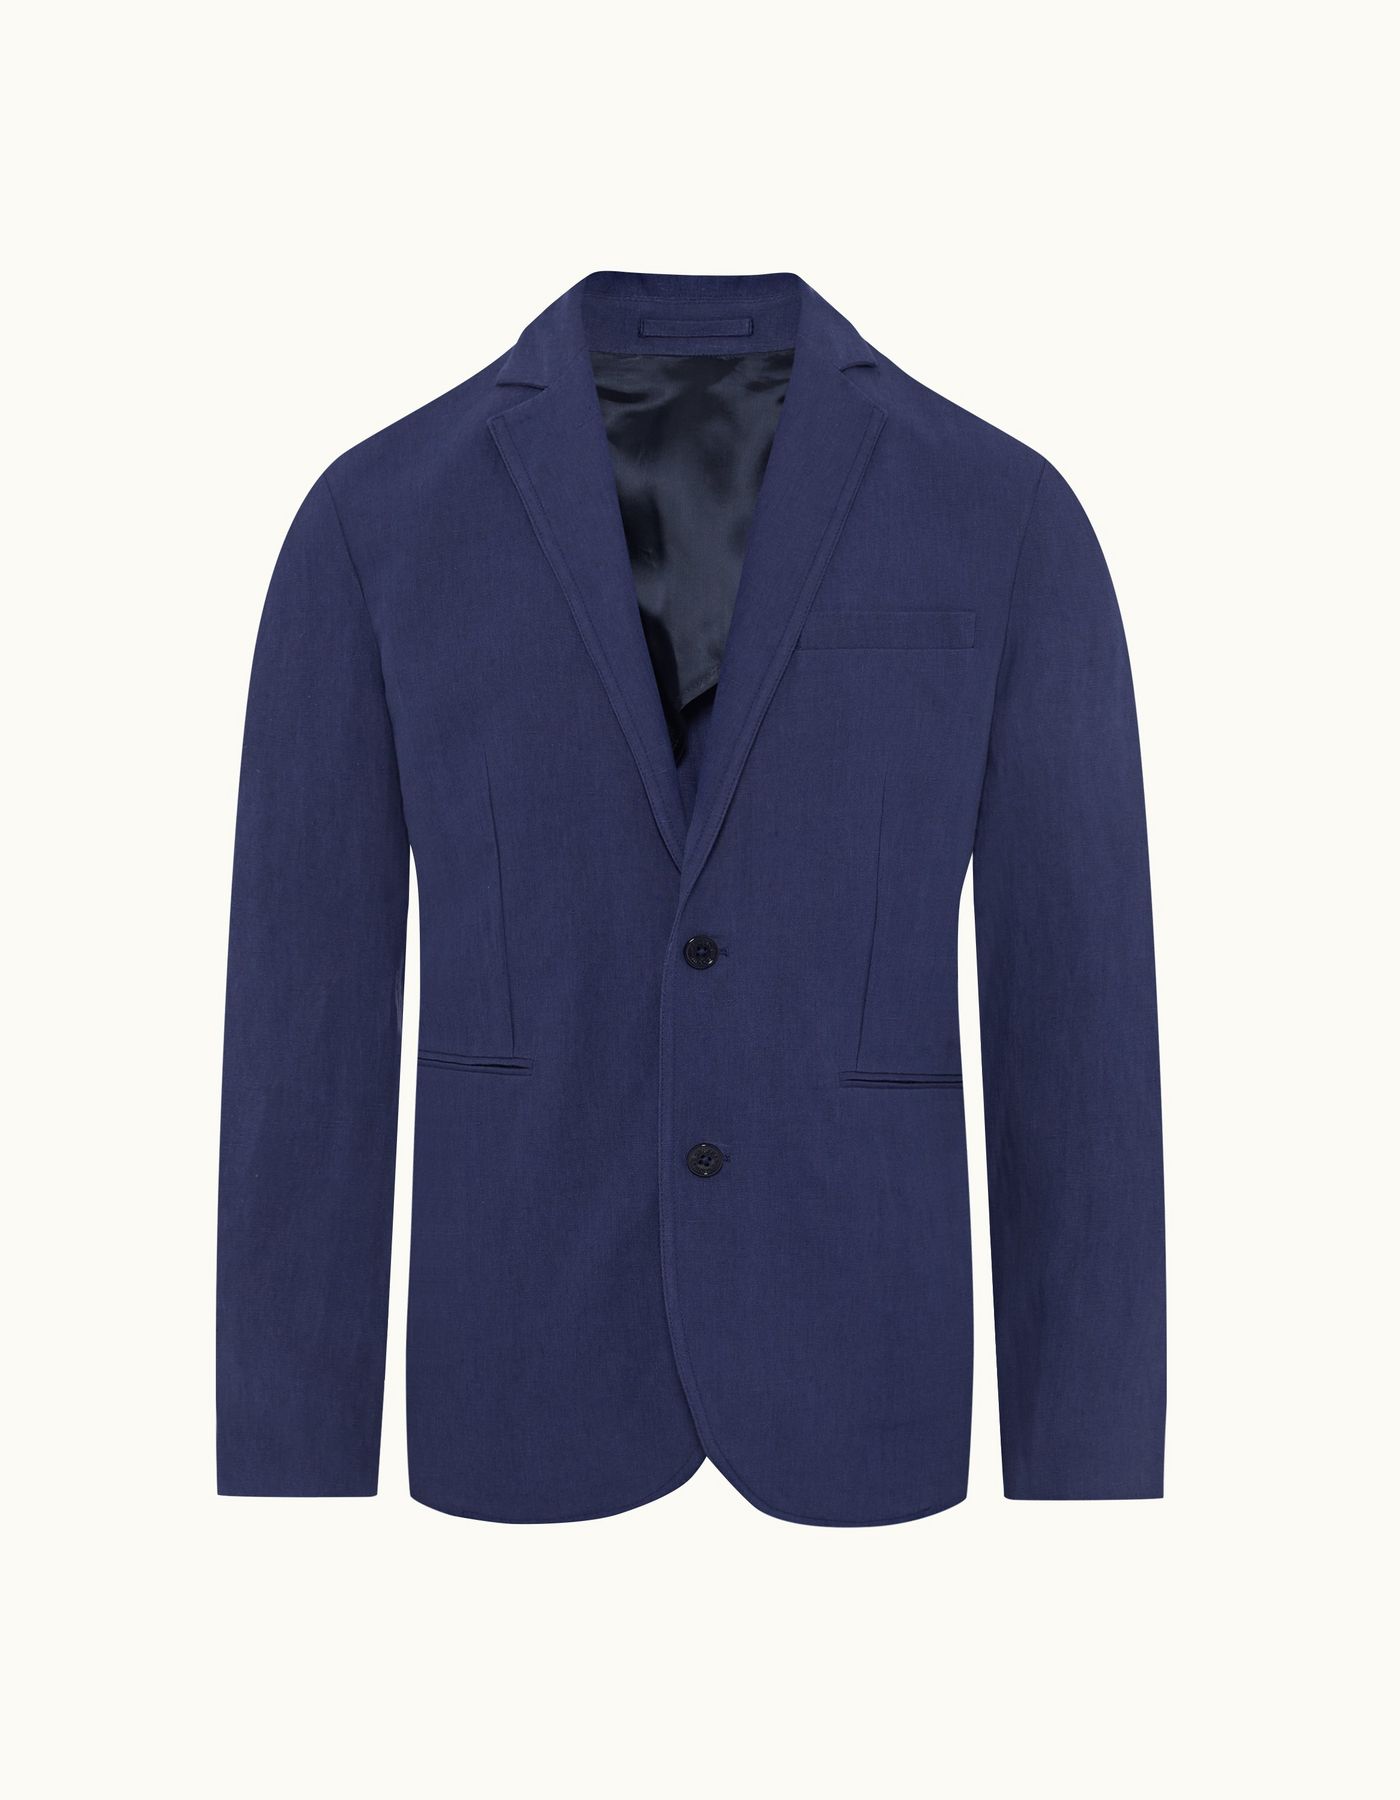 Ullock - Mens Lagoon Blue Tailored Fit Two-Button Unstructured Linen Blazer